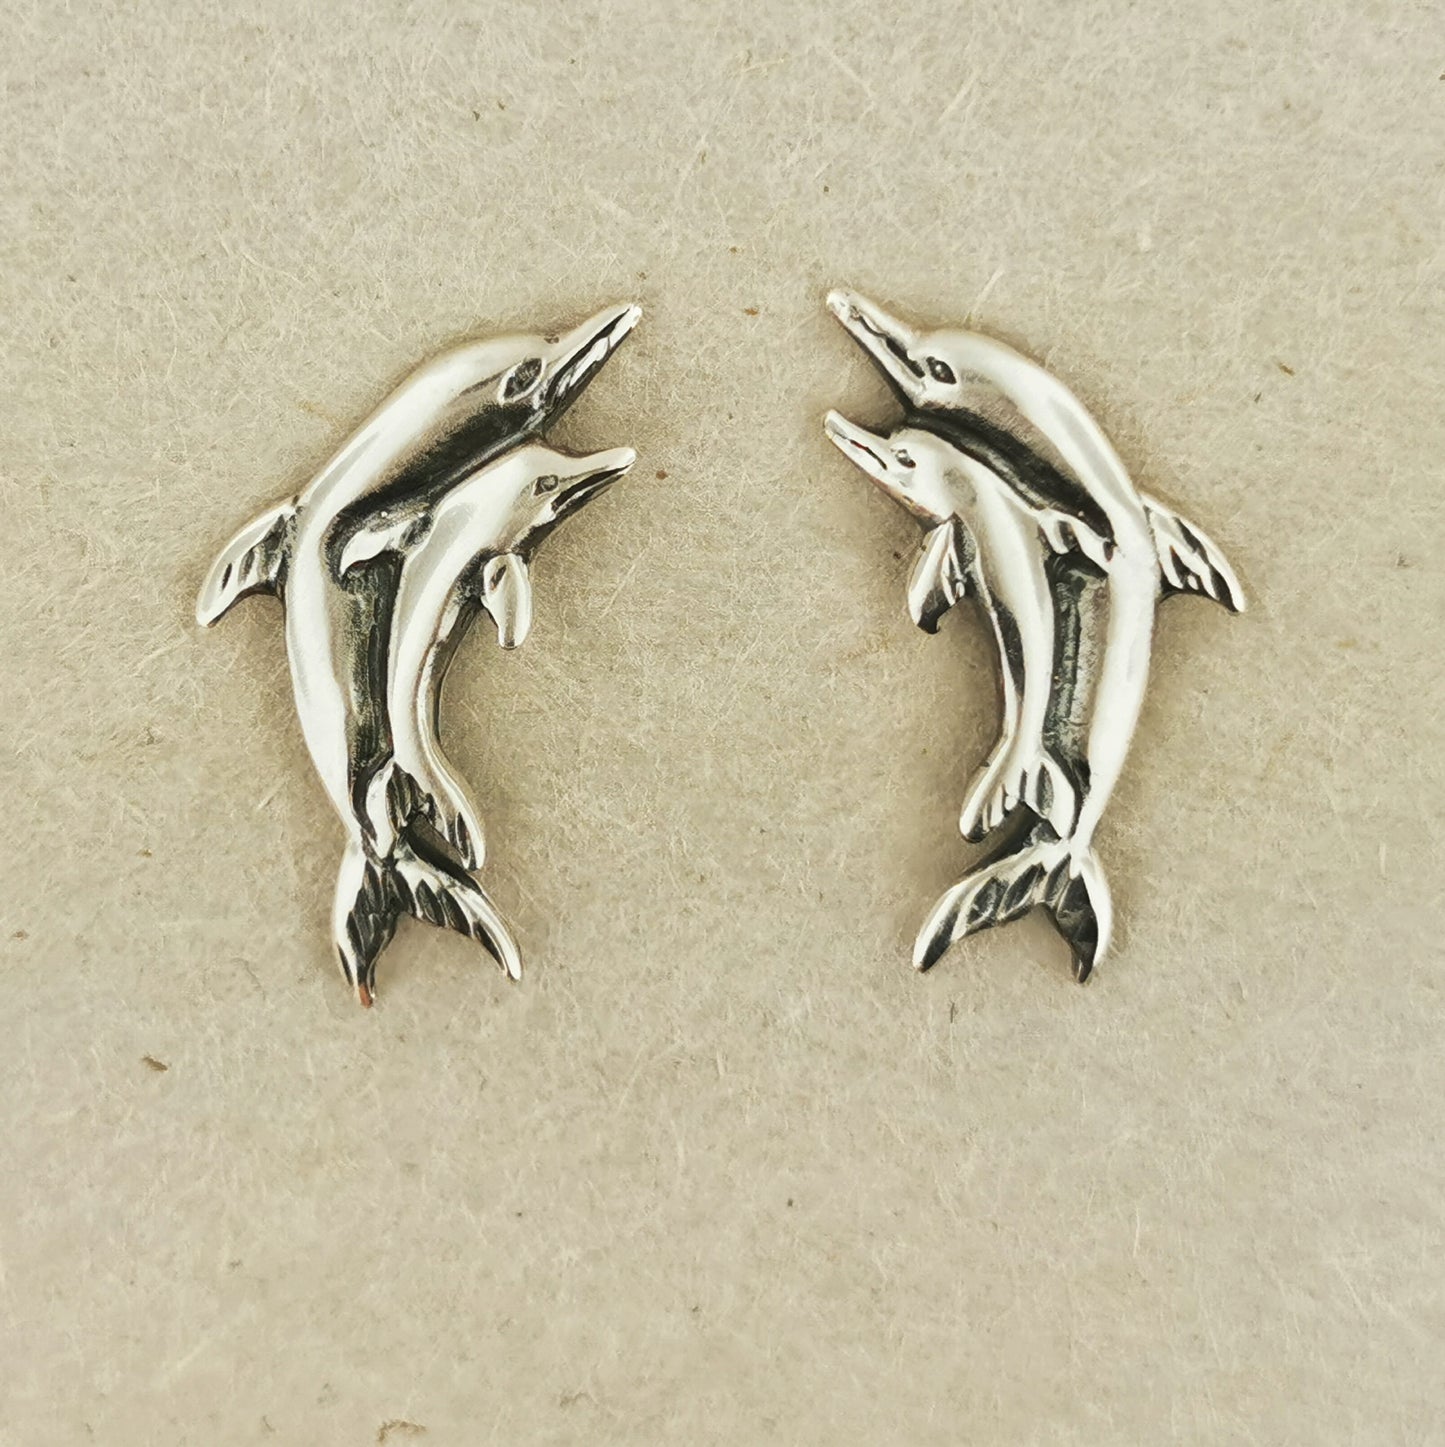 two dolphins stud earrings, dolphin stud earrings, silver dolphin studs, silver dolphin stud earrings, silver dolphin earrings, dolphin earrings, sterling silver dolphin earrings, silver dolphin jewelry, silver dolphin jewellery, dolphin lover jewelry, dolphin lover jewellery, cute dolphin earrings, porpoise earrings, silver porpoise earrings, porpoise jewelry, porpoise jewellery, silver stud earrings, silver studs, small silver earrings